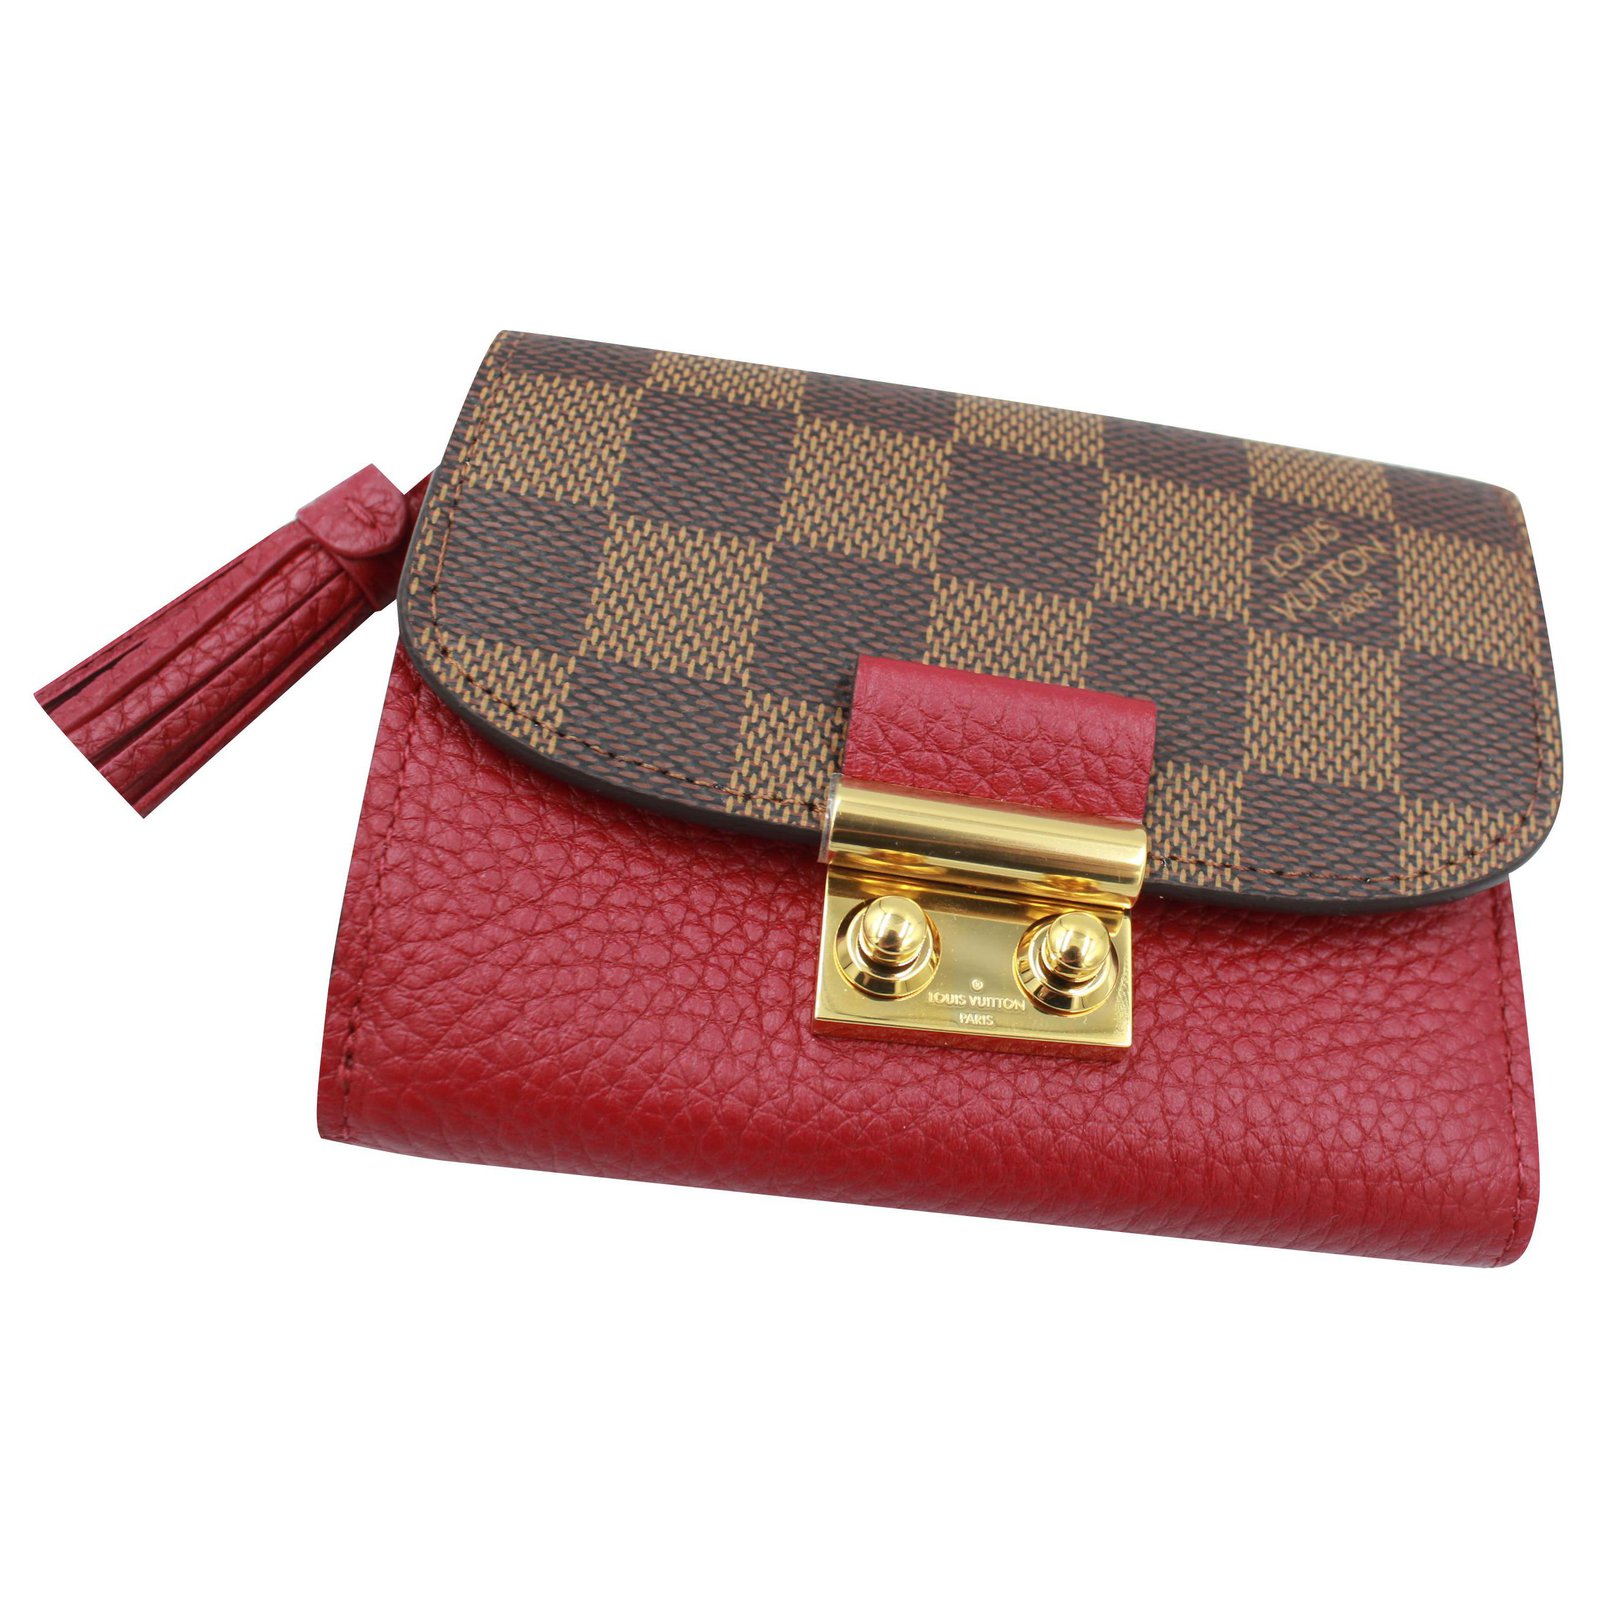 Louis Vuitton Damier Ebene Clemence Leather Marco Bifold Compact